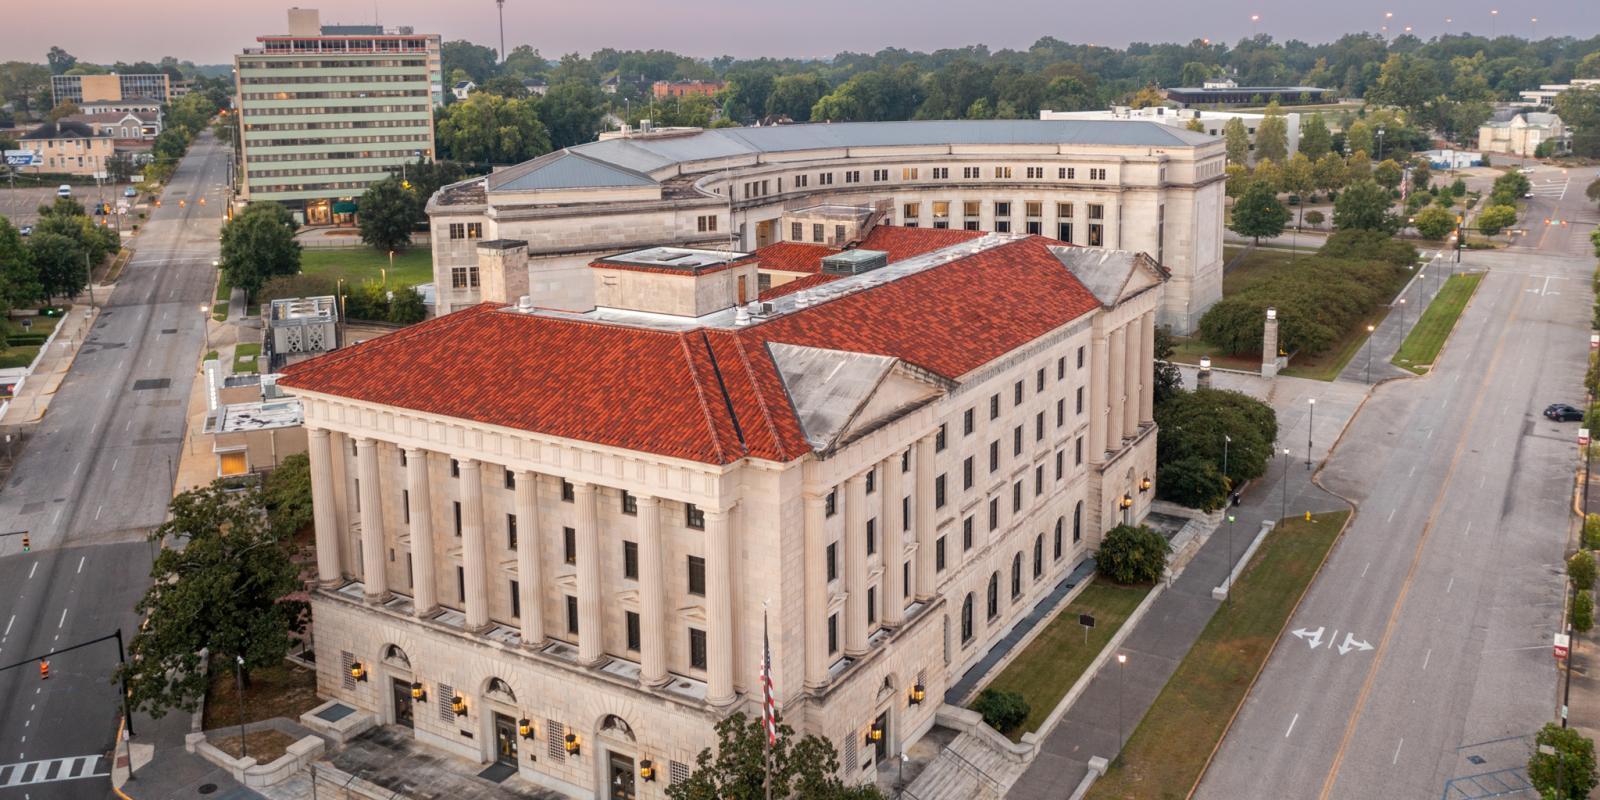 Historic Courthouse from above